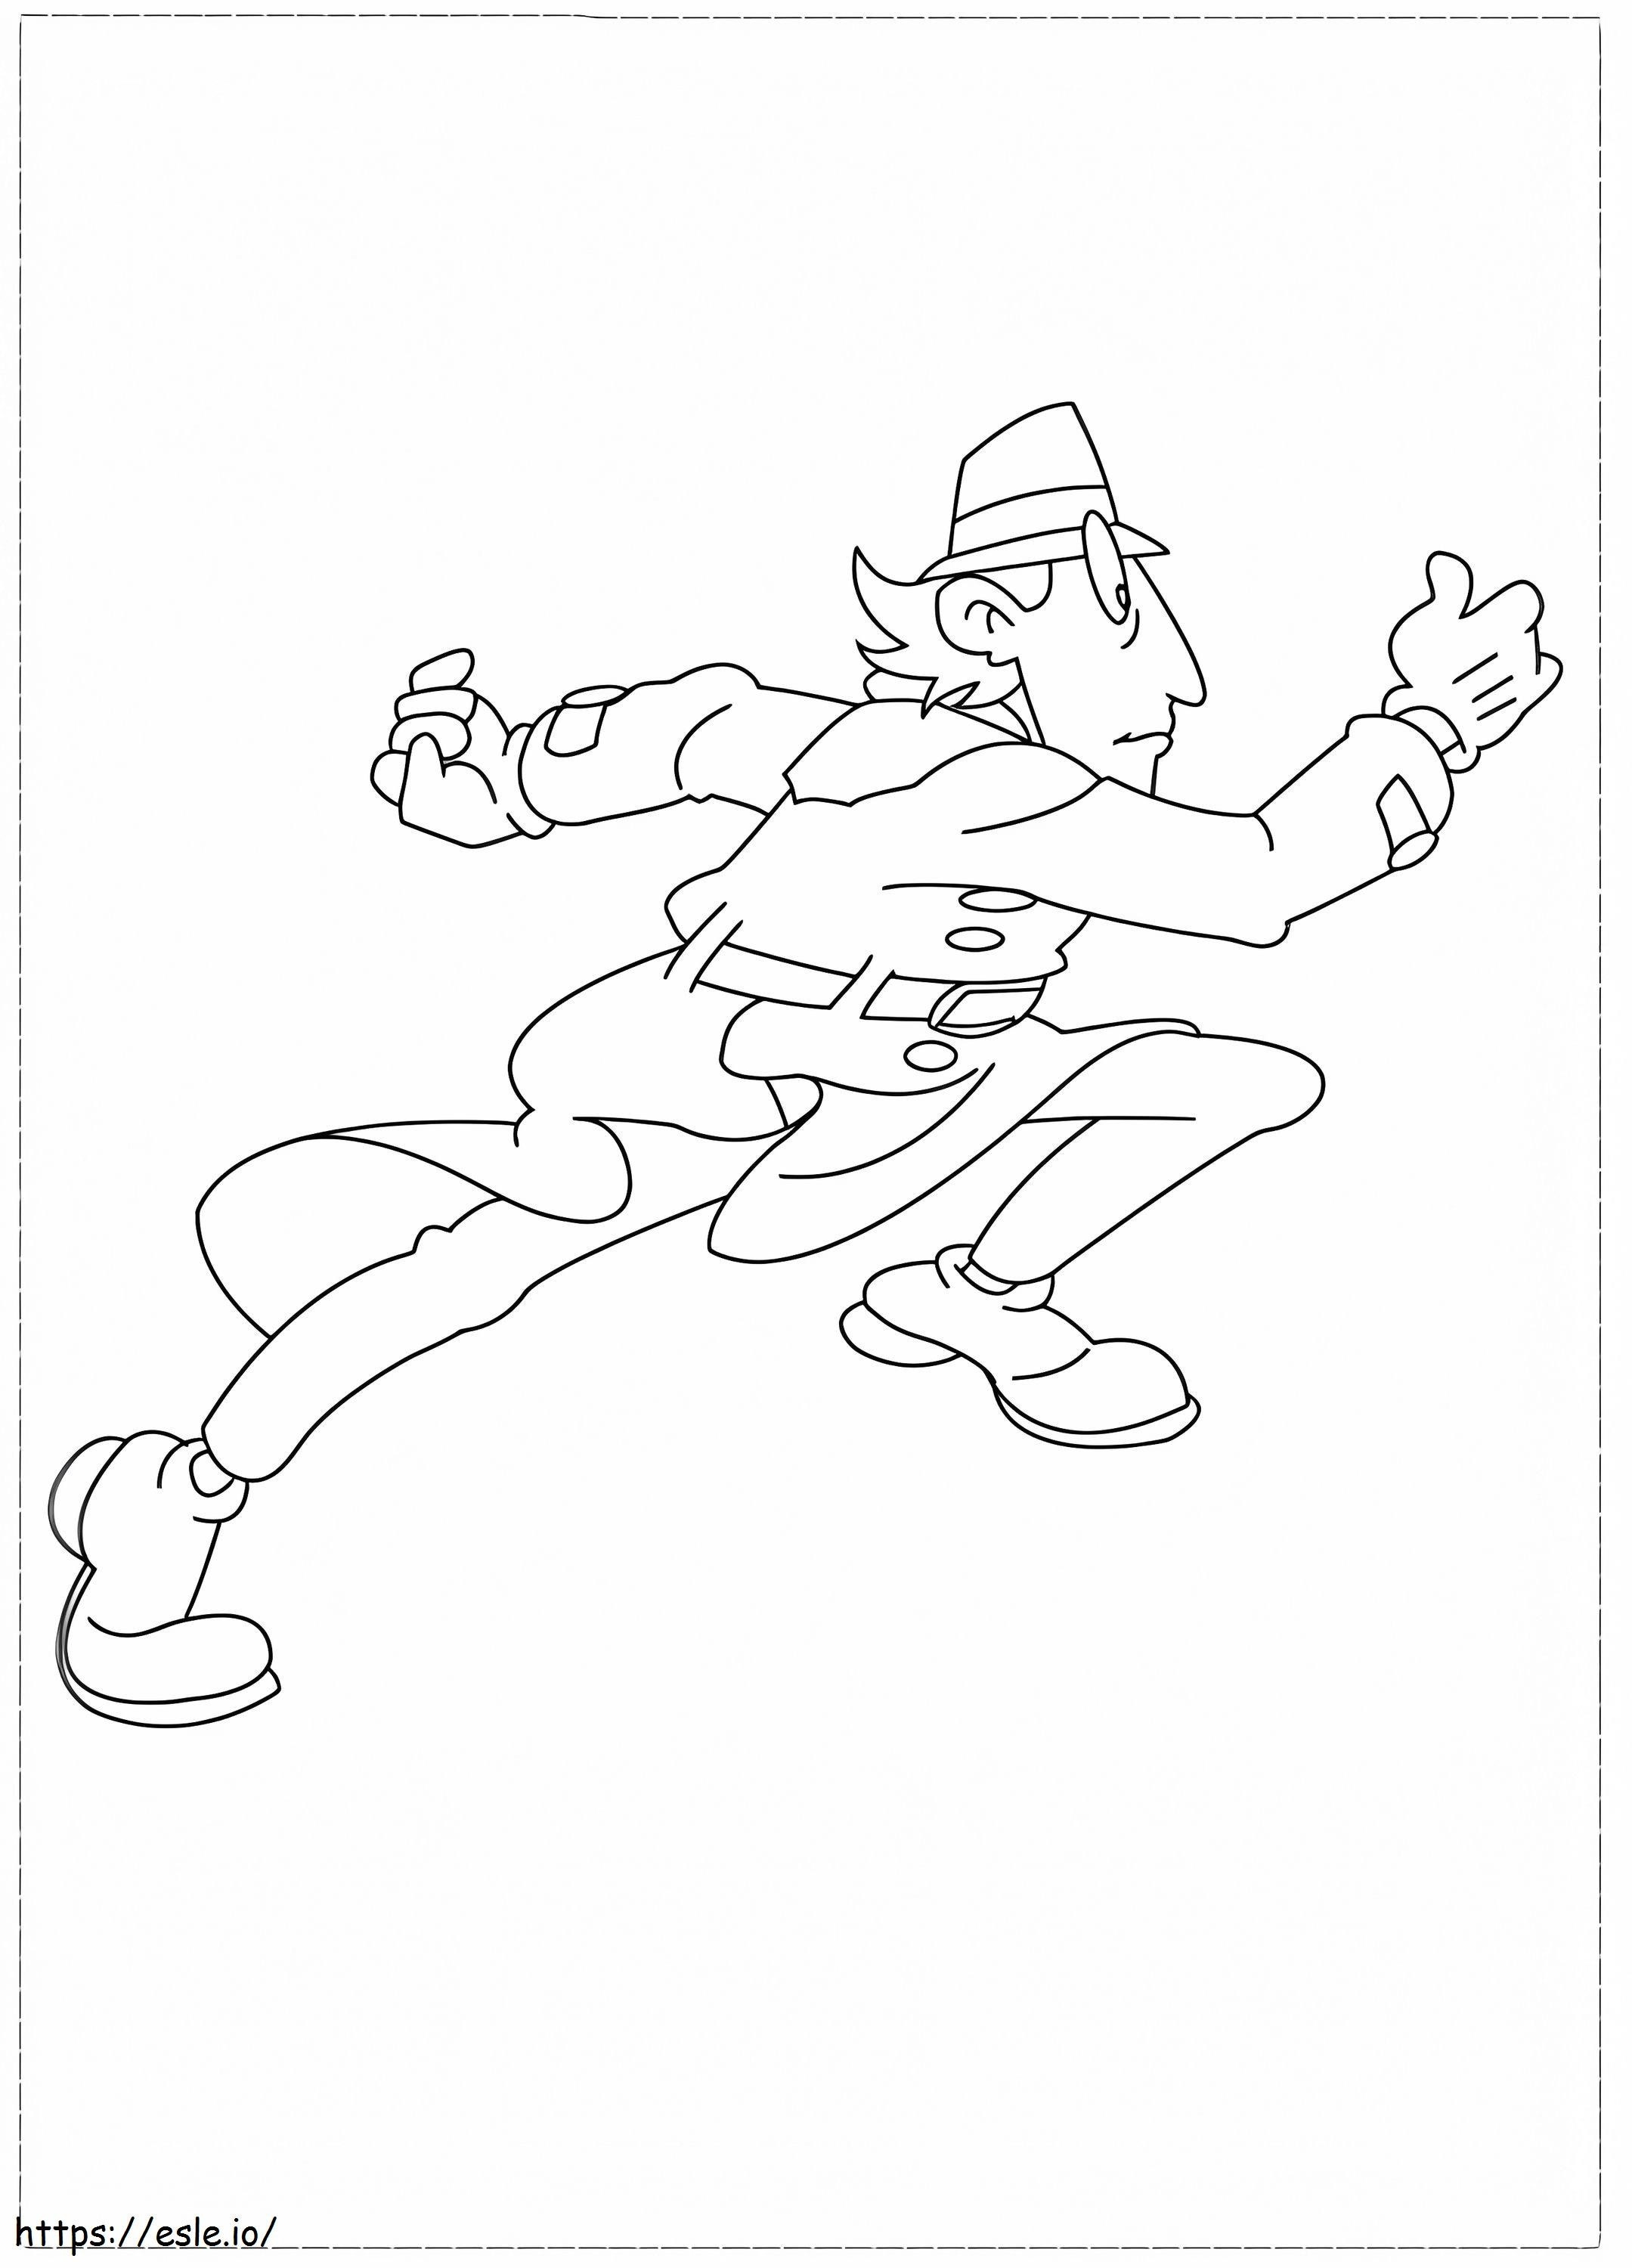 Inspector Gadget Running Fast coloring page